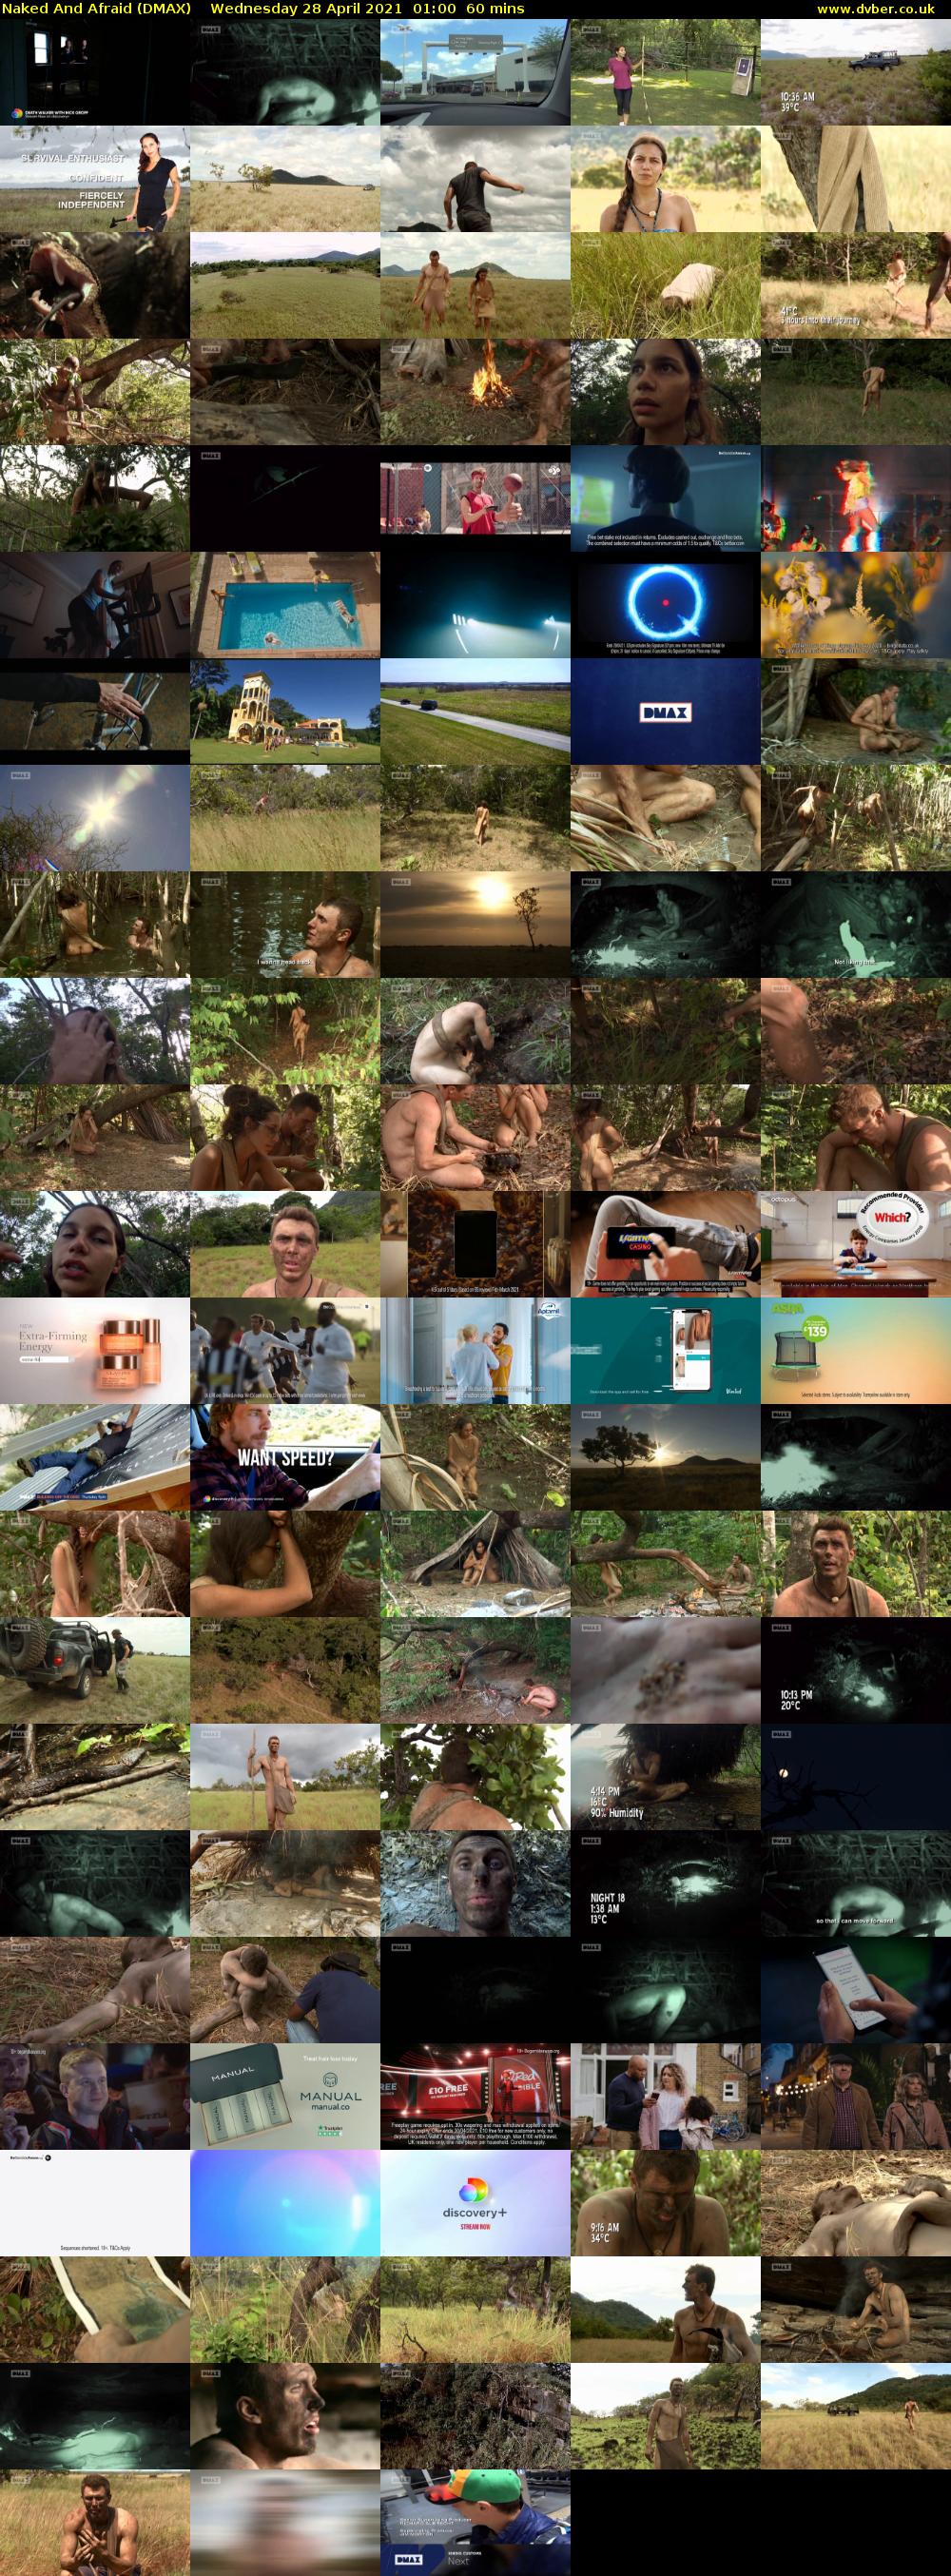 Naked And Afraid (DMAX) Wednesday 28 April 2021 01:00 - 02:00